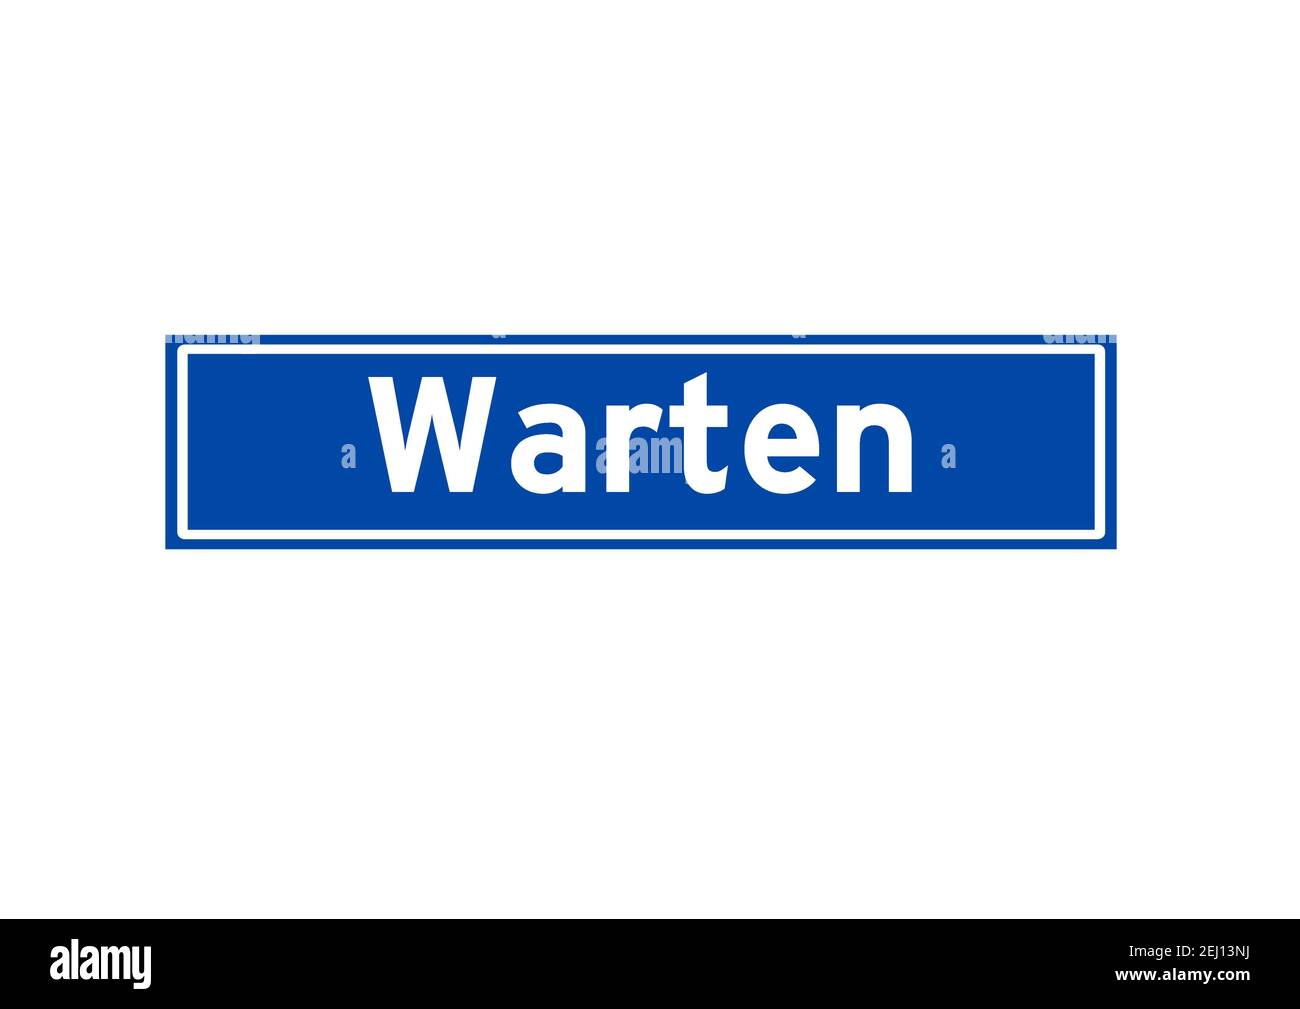 Warten isolated Dutch place name sign. City sign from the Netherlands. Stock Photo